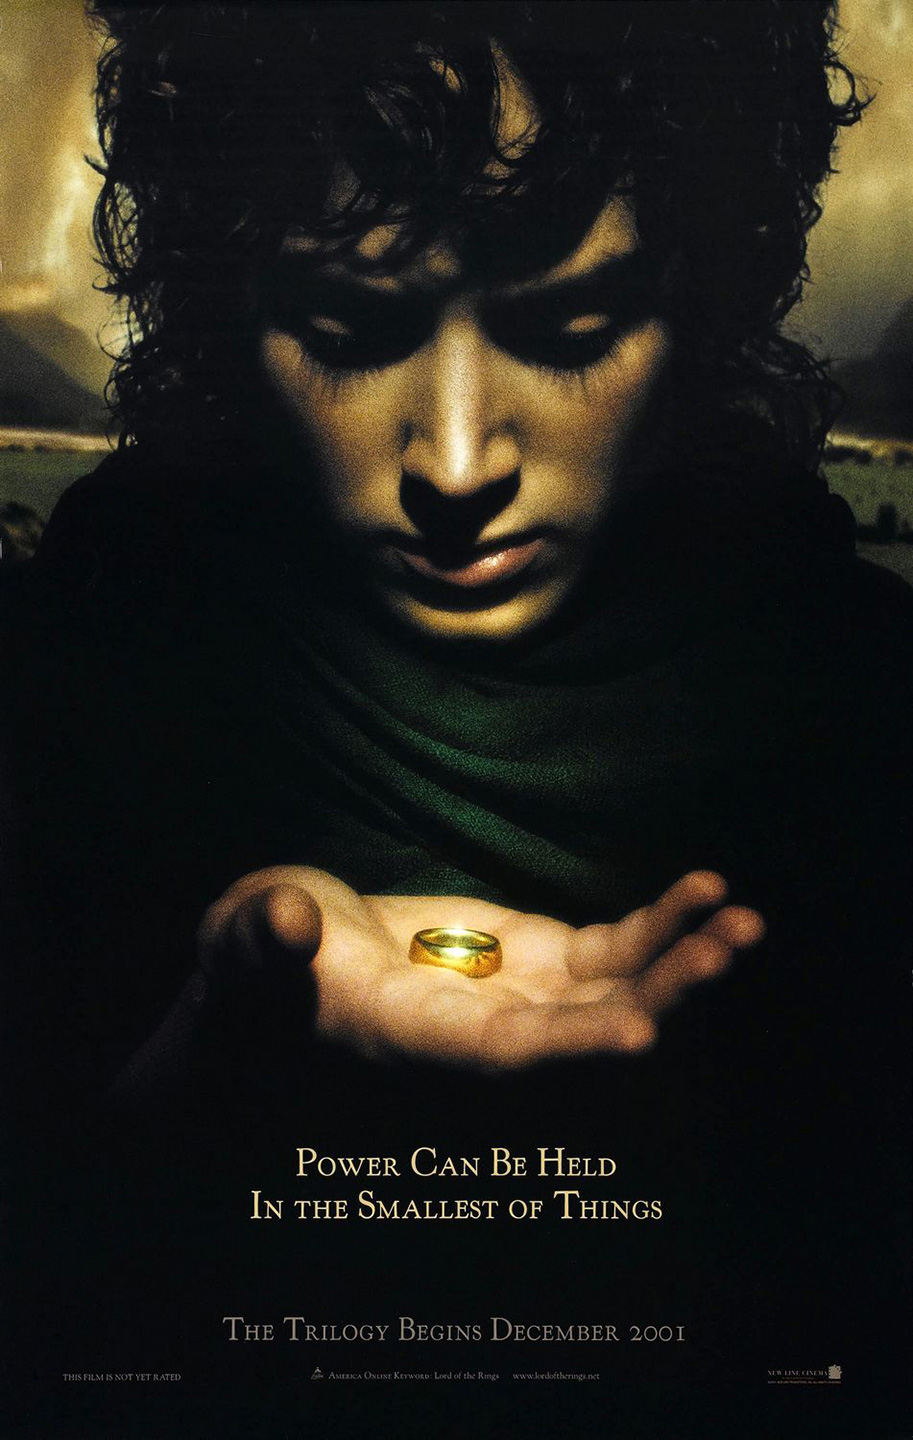 Lord of the Rings, Fellowship of the Ring, Peter Jackson